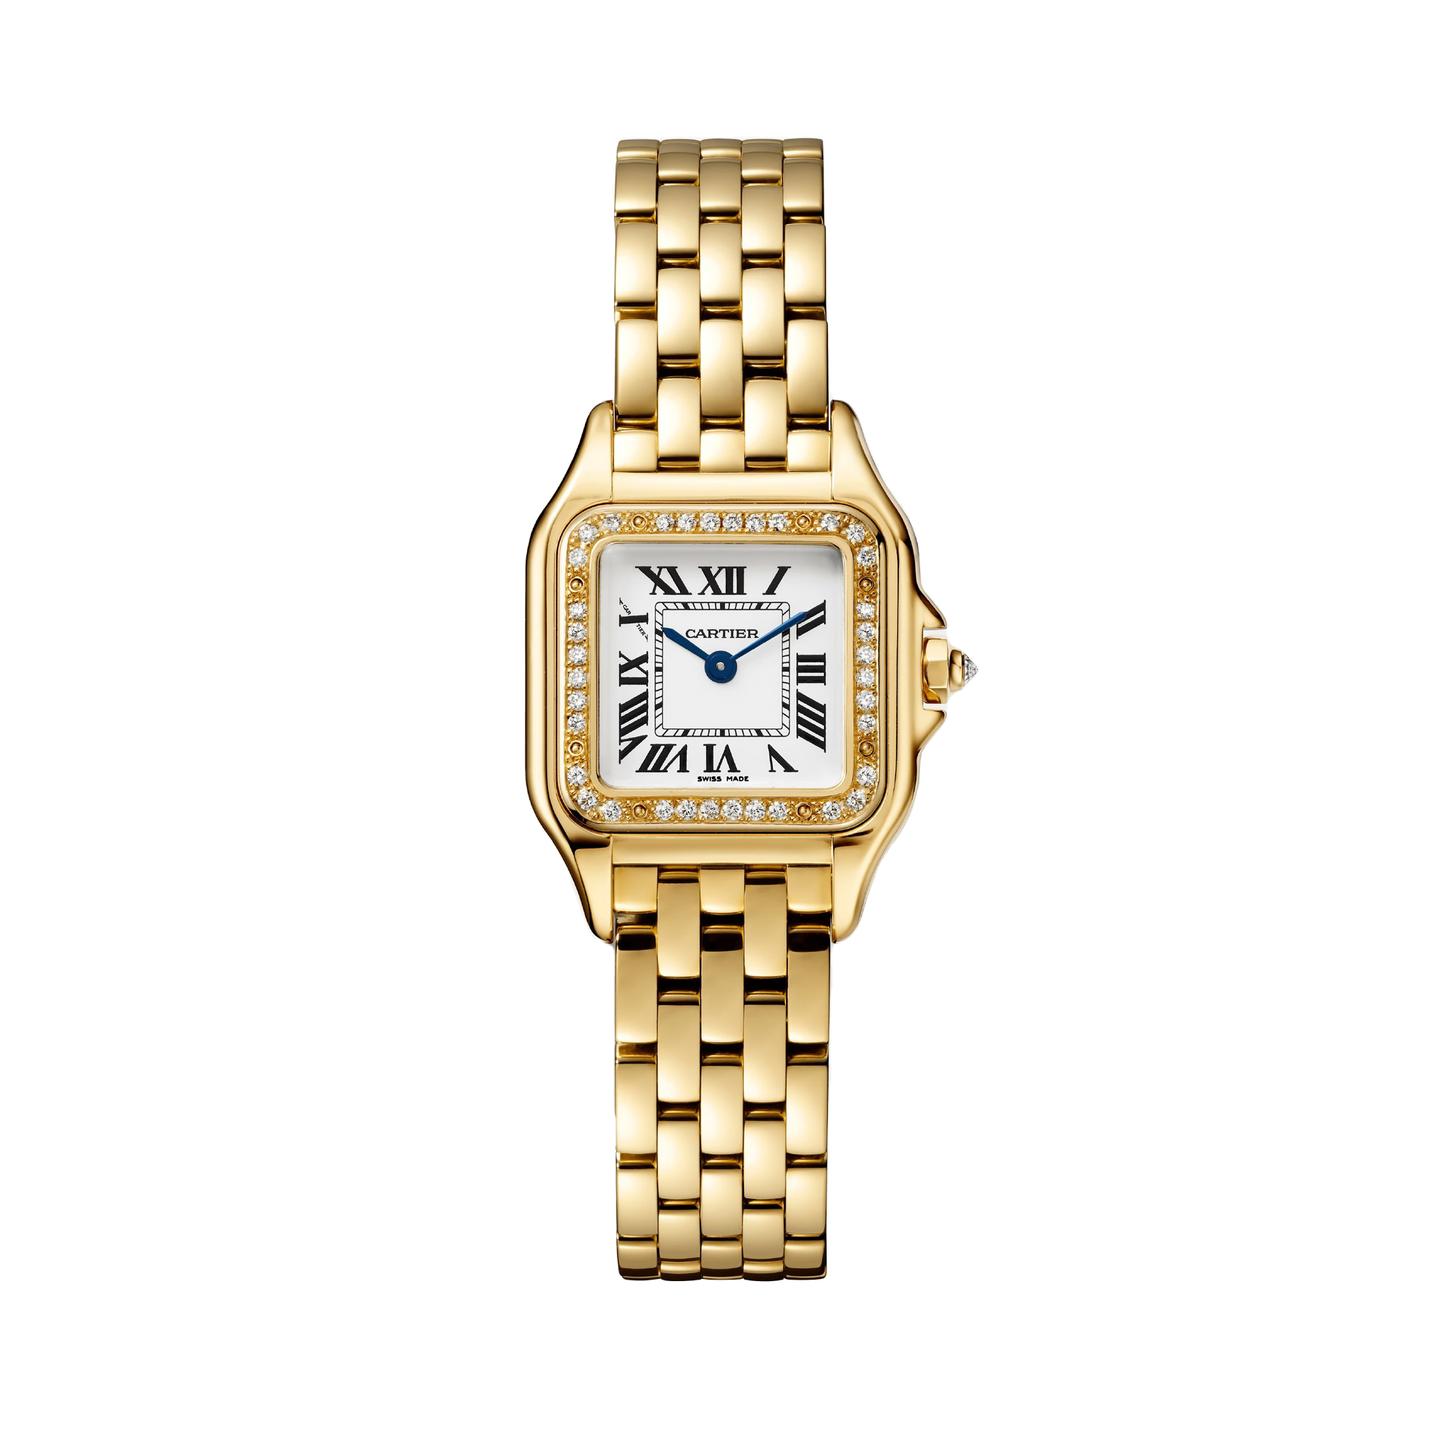 Panthere de Cartier Watch in Yellow Gold, size small 5